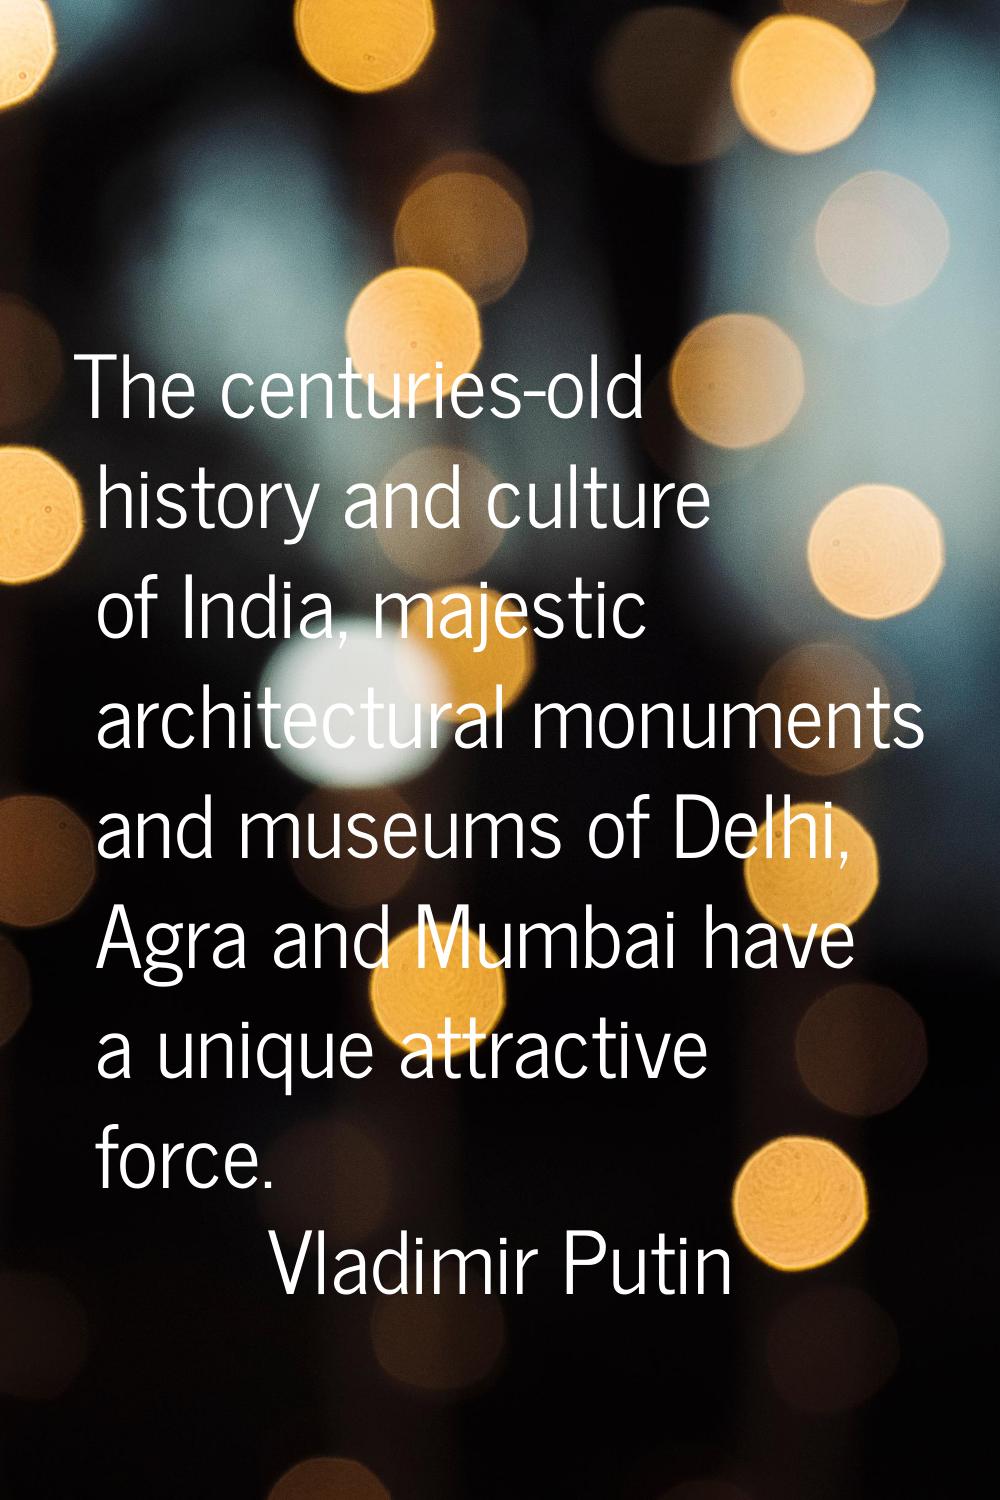 The centuries-old history and culture of India, majestic architectural monuments and museums of Del